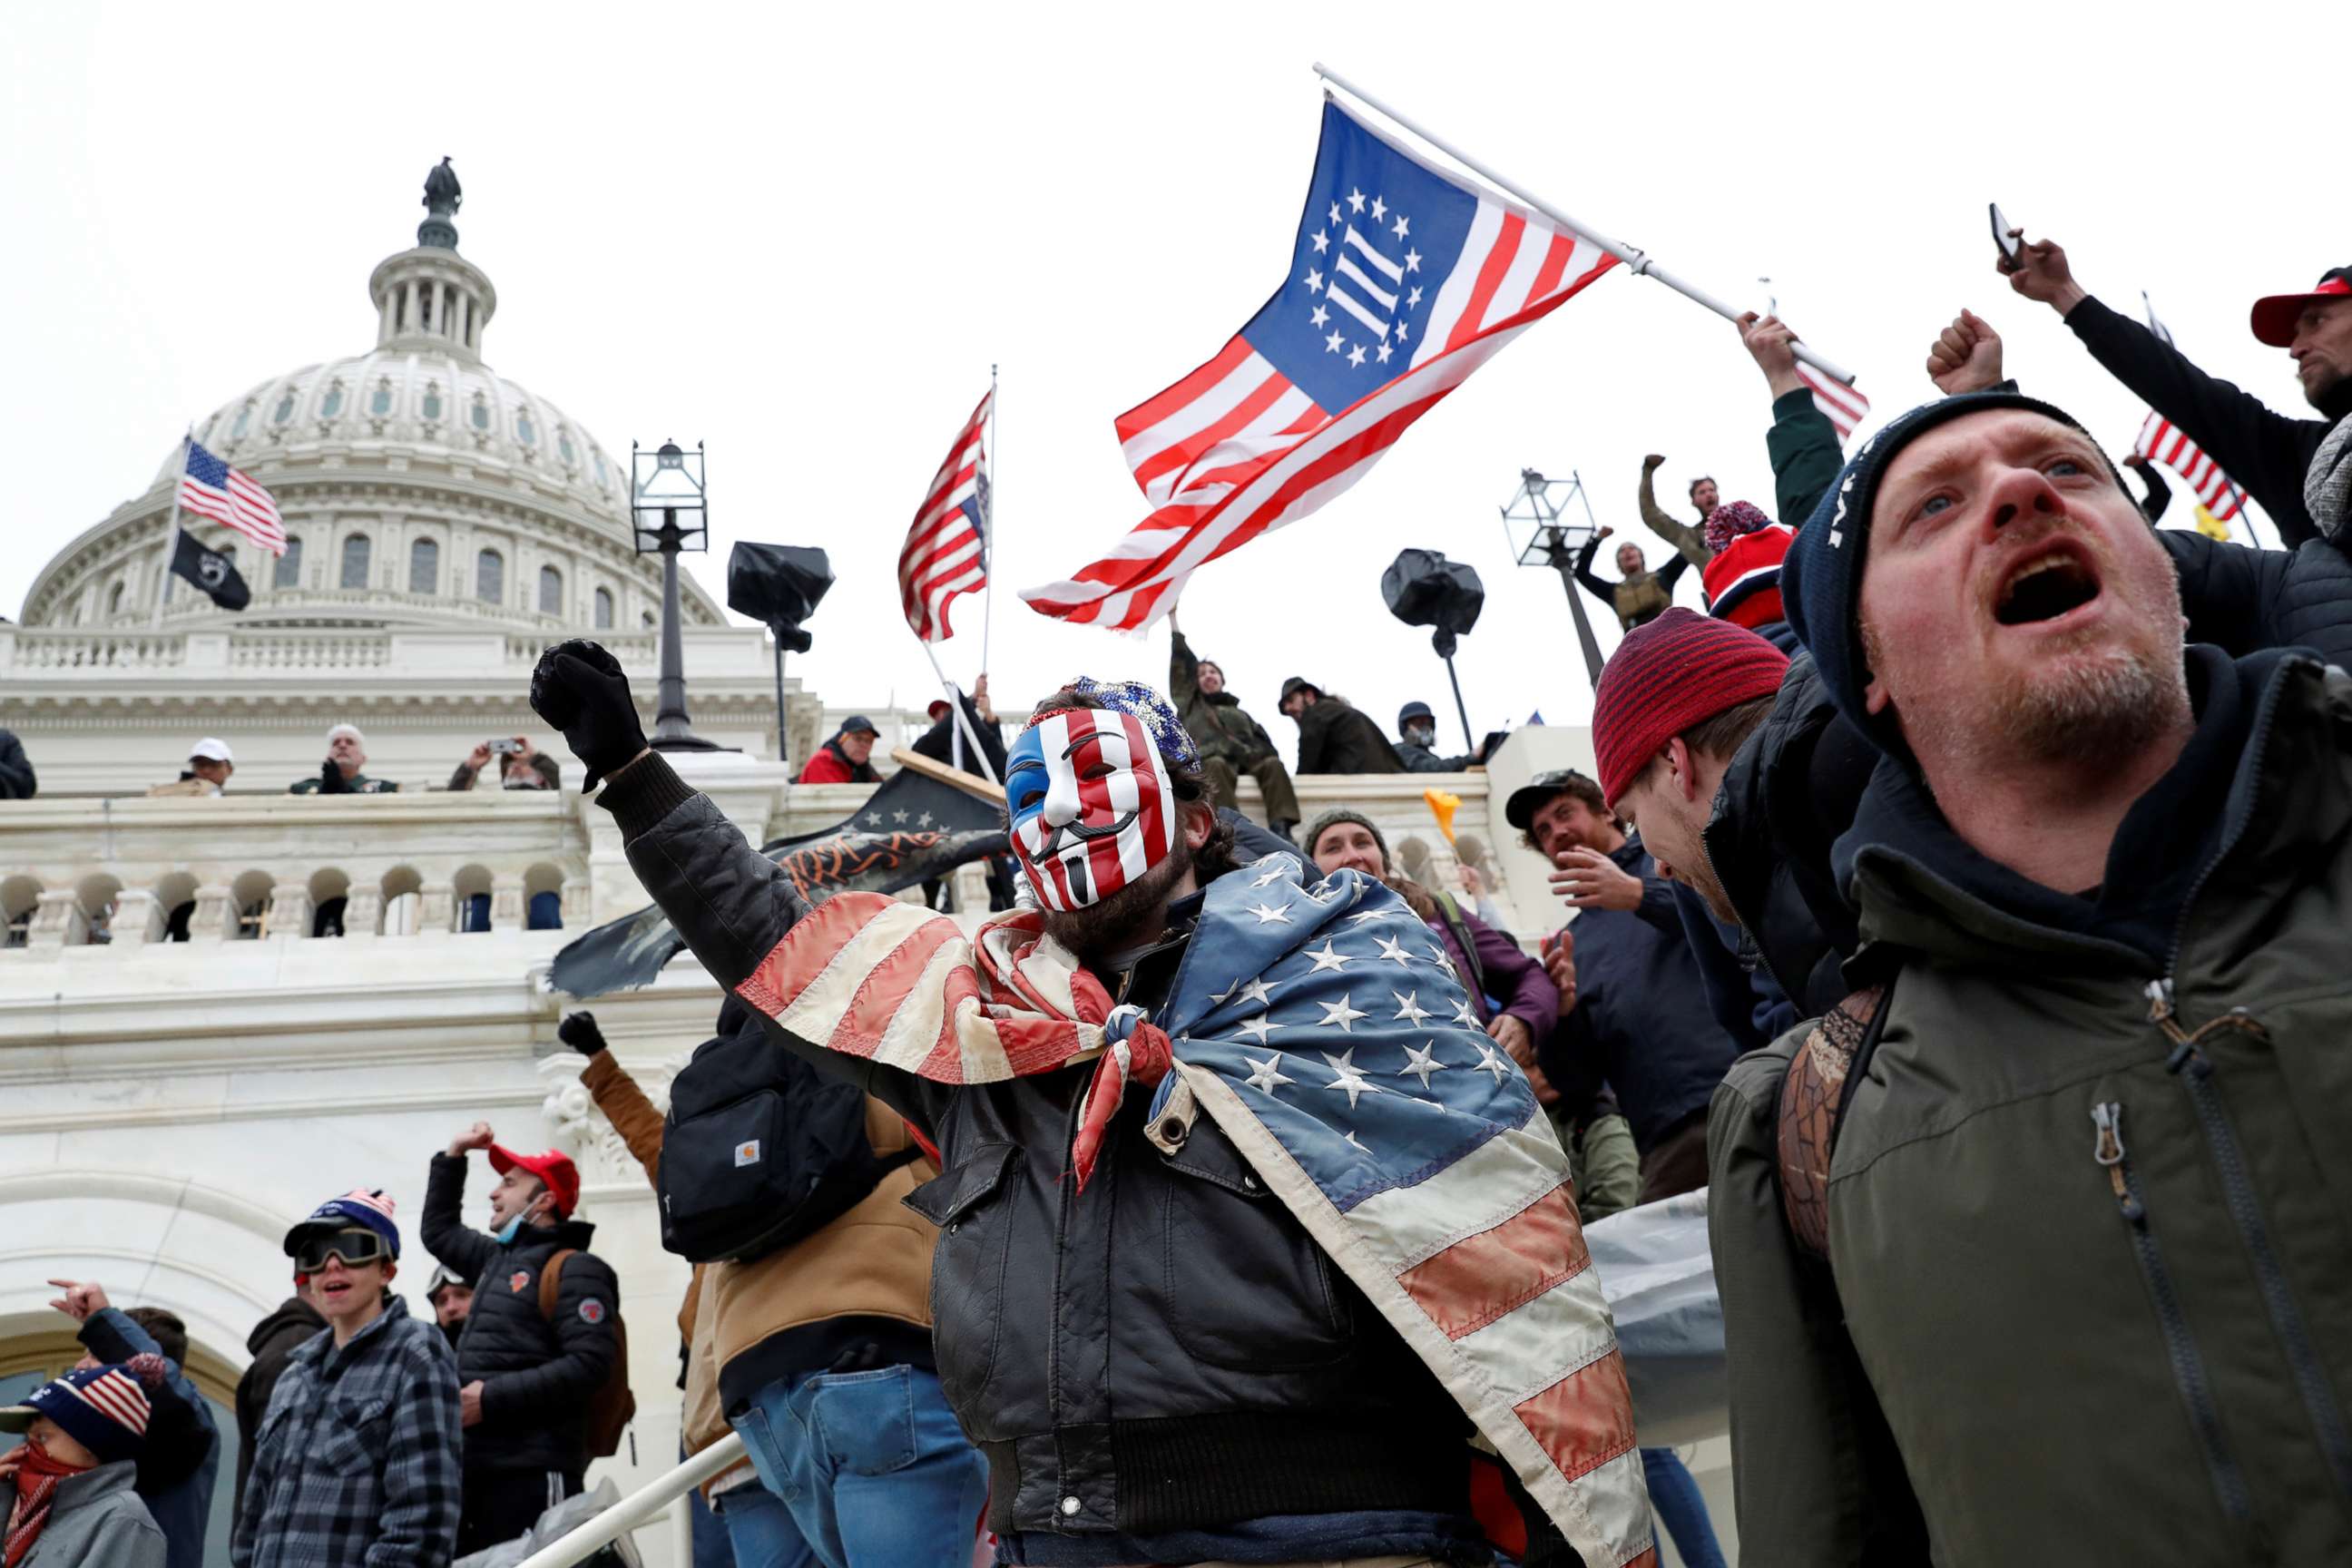 PHOTO: A Three Percenters flag is carried by people who broke into the Capitol grounds to contest the certification of the 2020 presidential election results, at the U.S. Capitol Building in Washington, D.C., Jan. 6, 2021. 